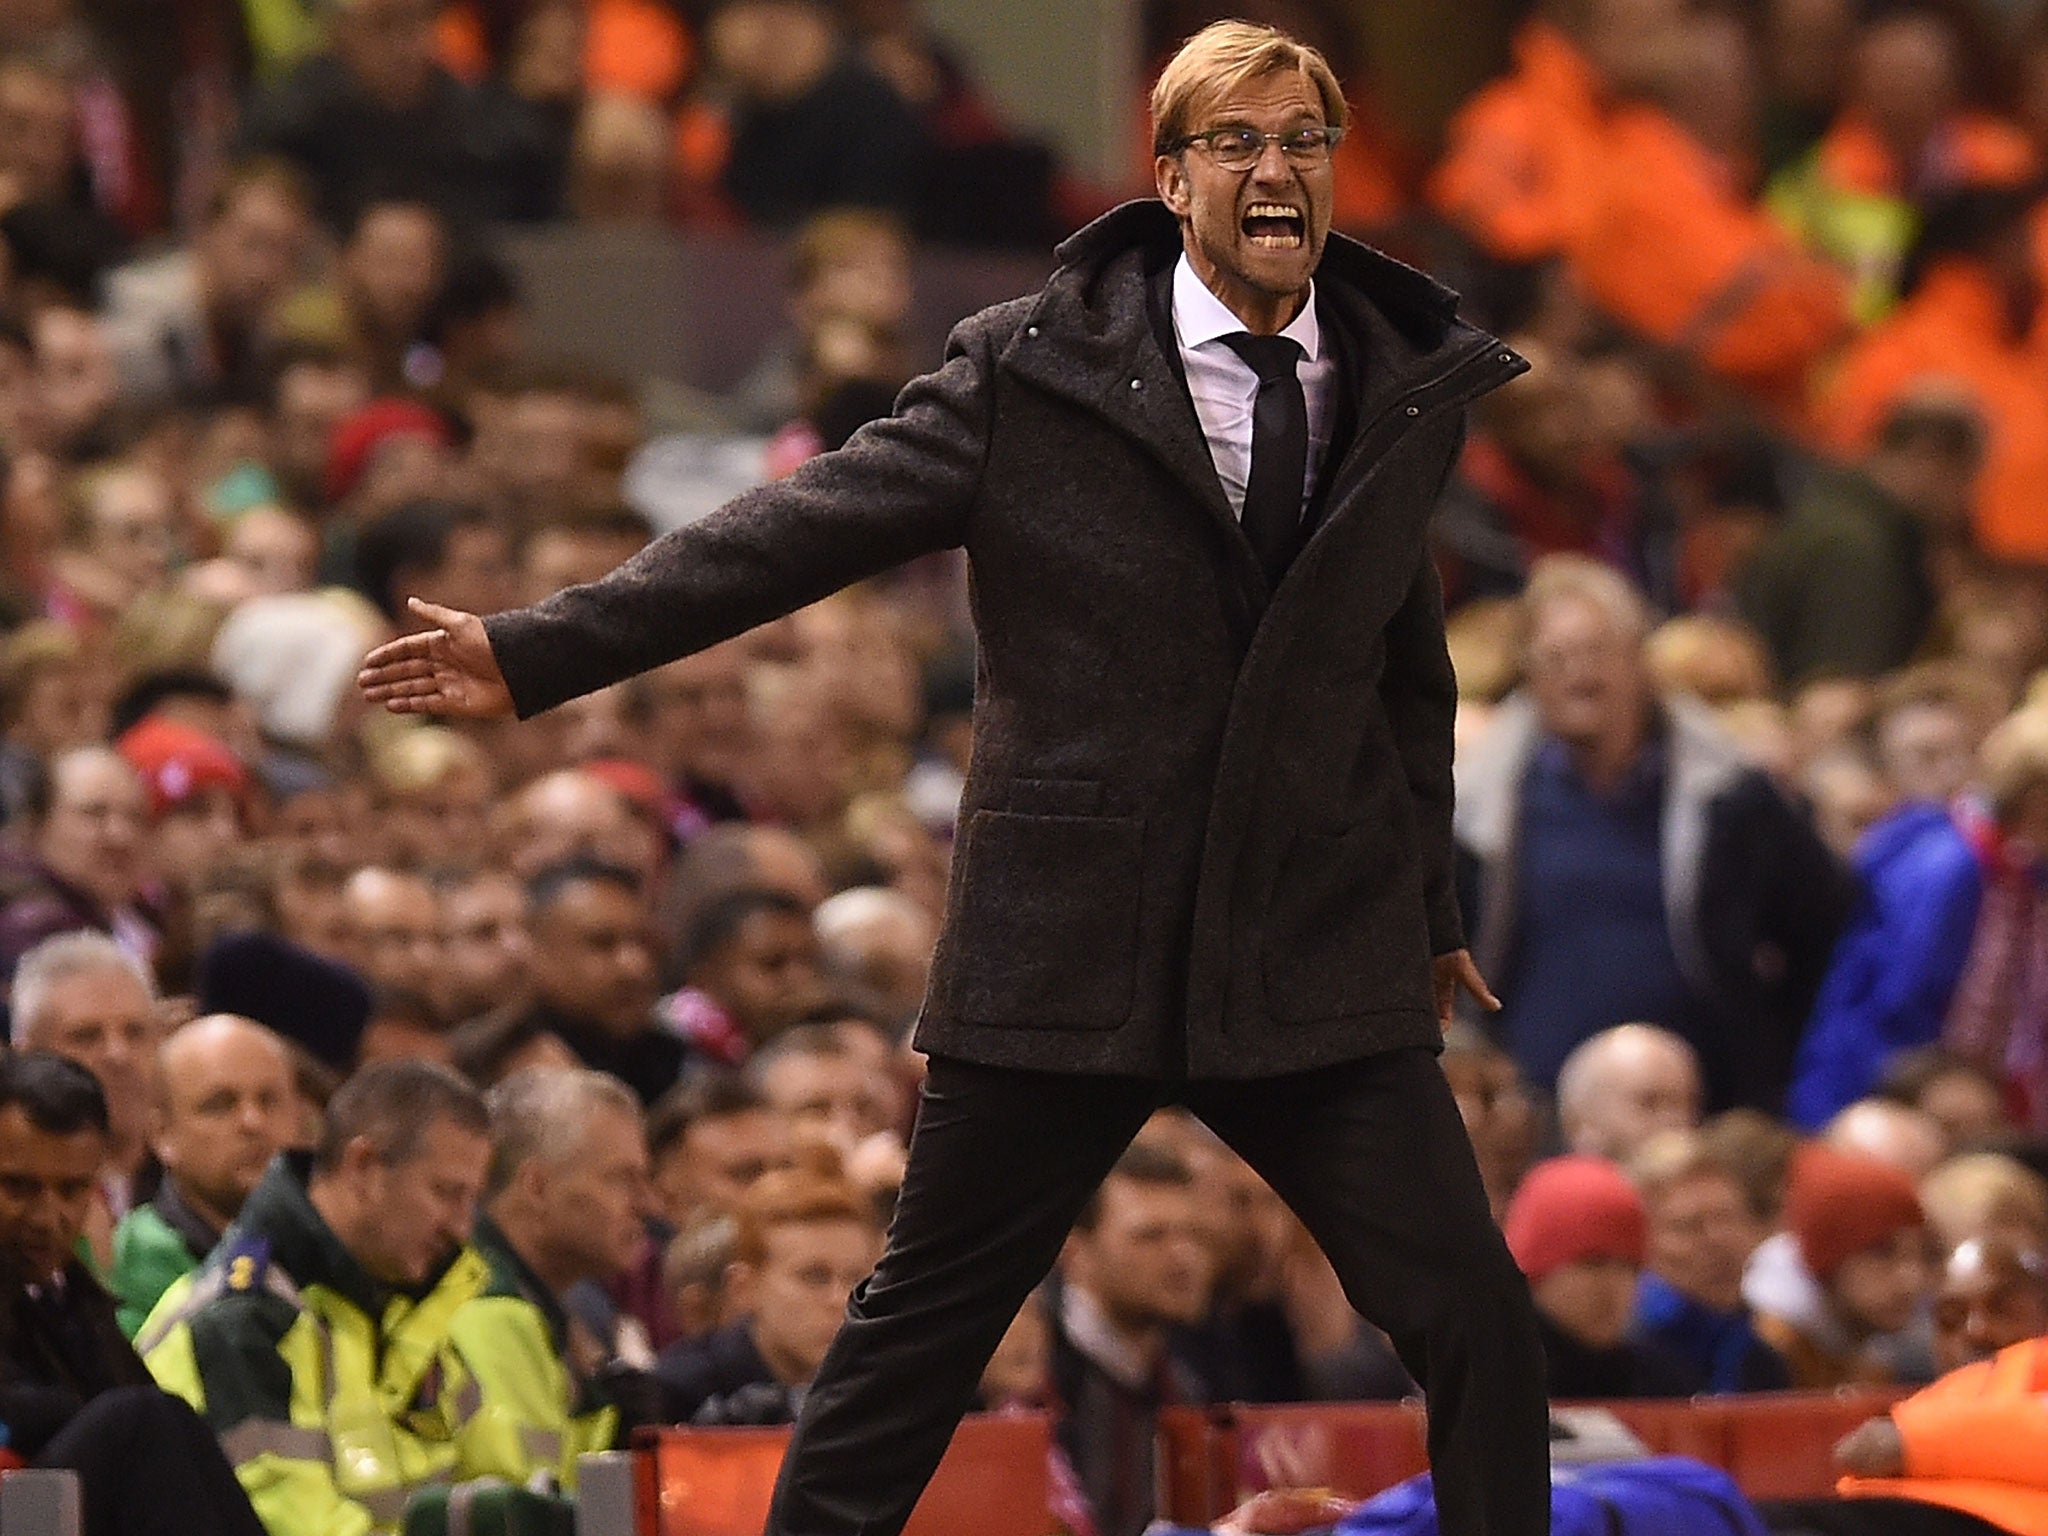 Liverpool manager Jurgen Klopp reacts on the sideline during the 1-1 draw with Rubin Kazan